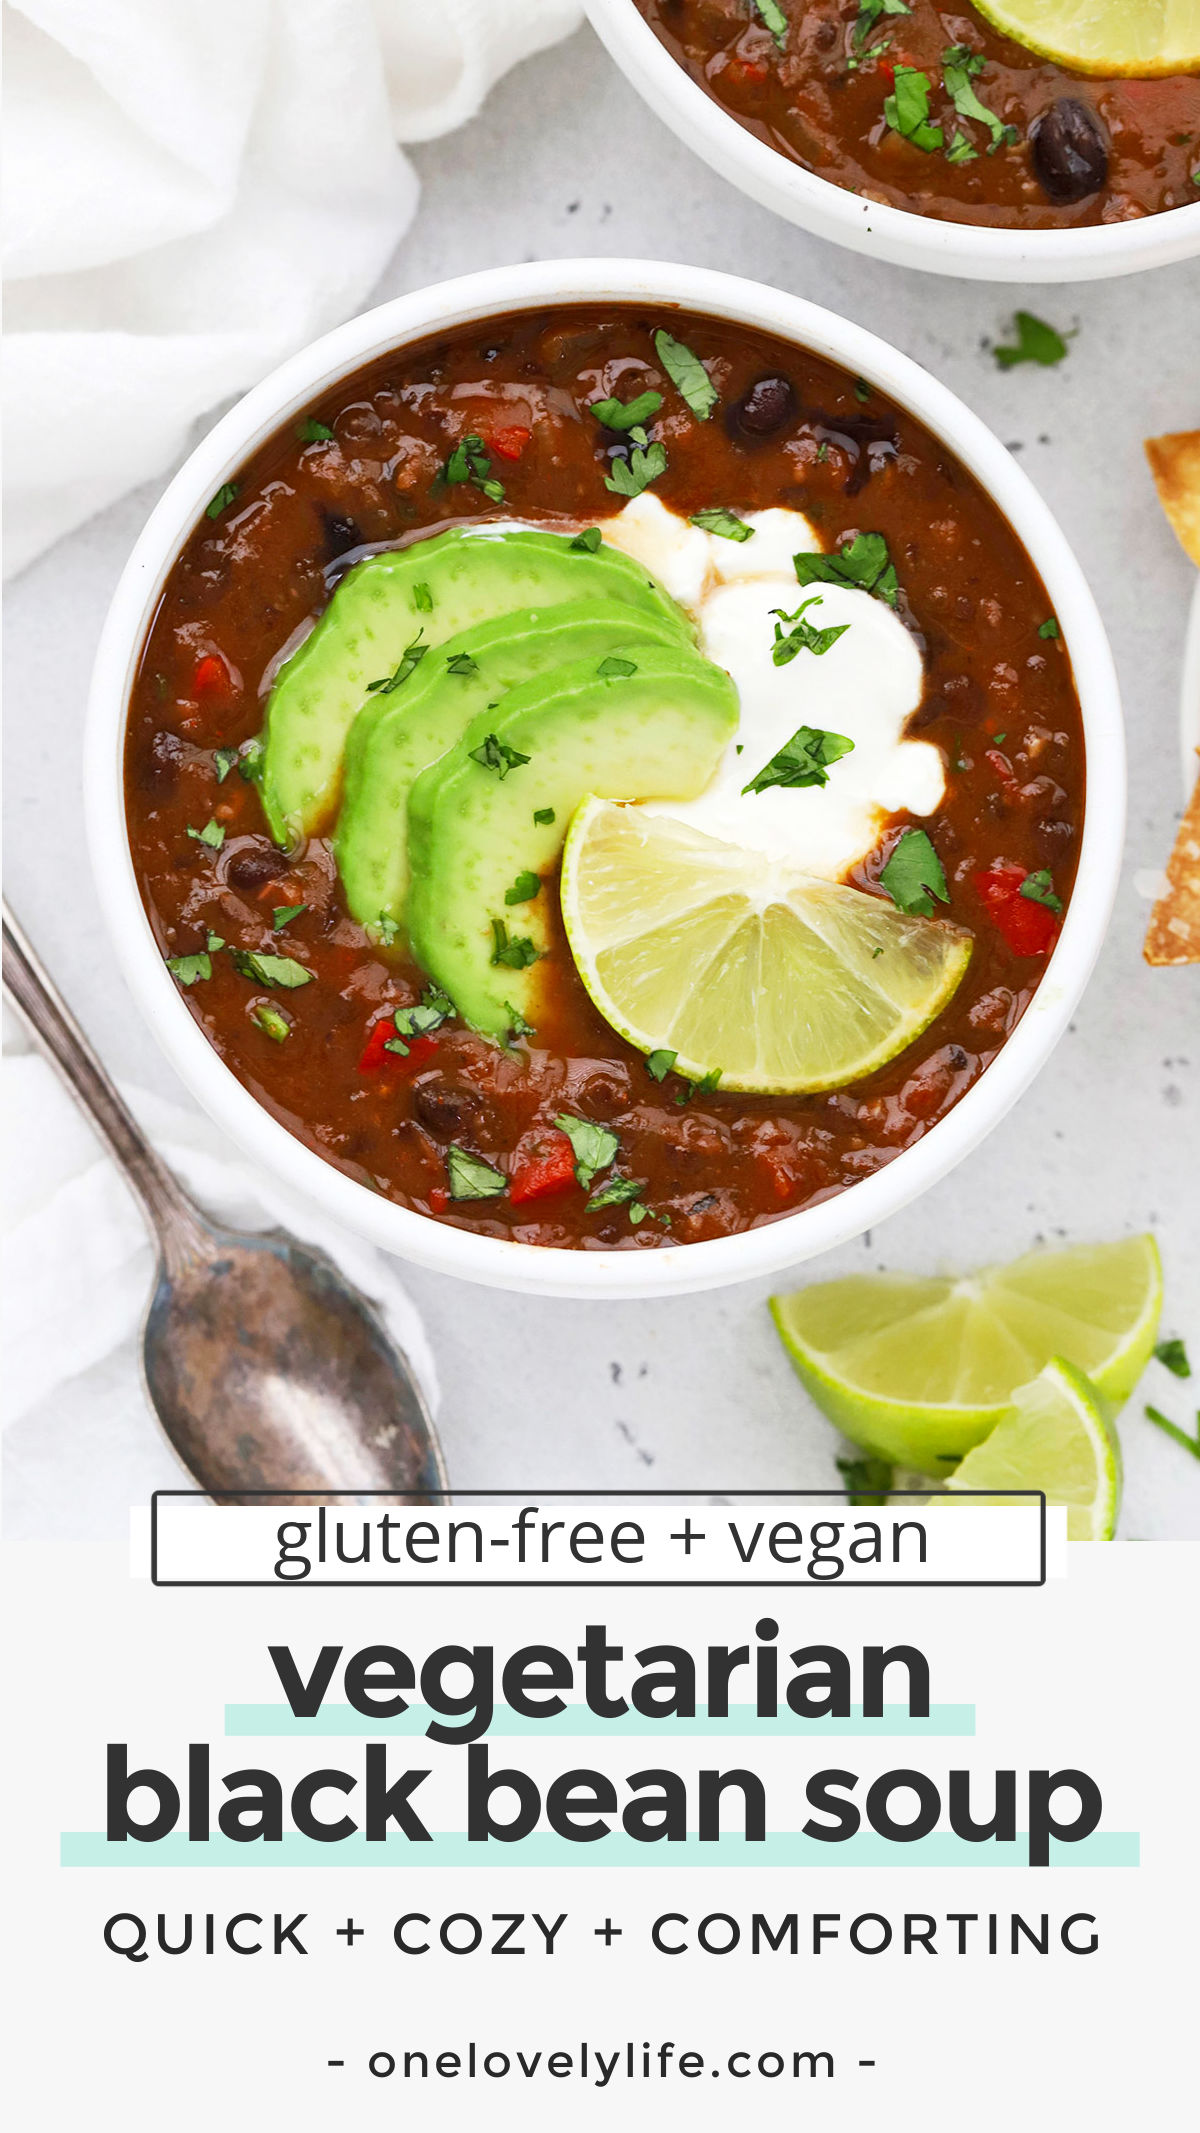 Easy Vegan Black Bean Soup - This healthy black bean soup is so simple to make! You'll love the colors and flavor. (Gluten free & vegan) // Vegetarian Black bean soup // bean soup recipe // vegan soup // vegetarian soup // healthy soup // vegan chili // black bean chili // healthy dinner #healthydinner #healthysoup #vegan #vegetarian #blackbeansoup #meatlessmonday